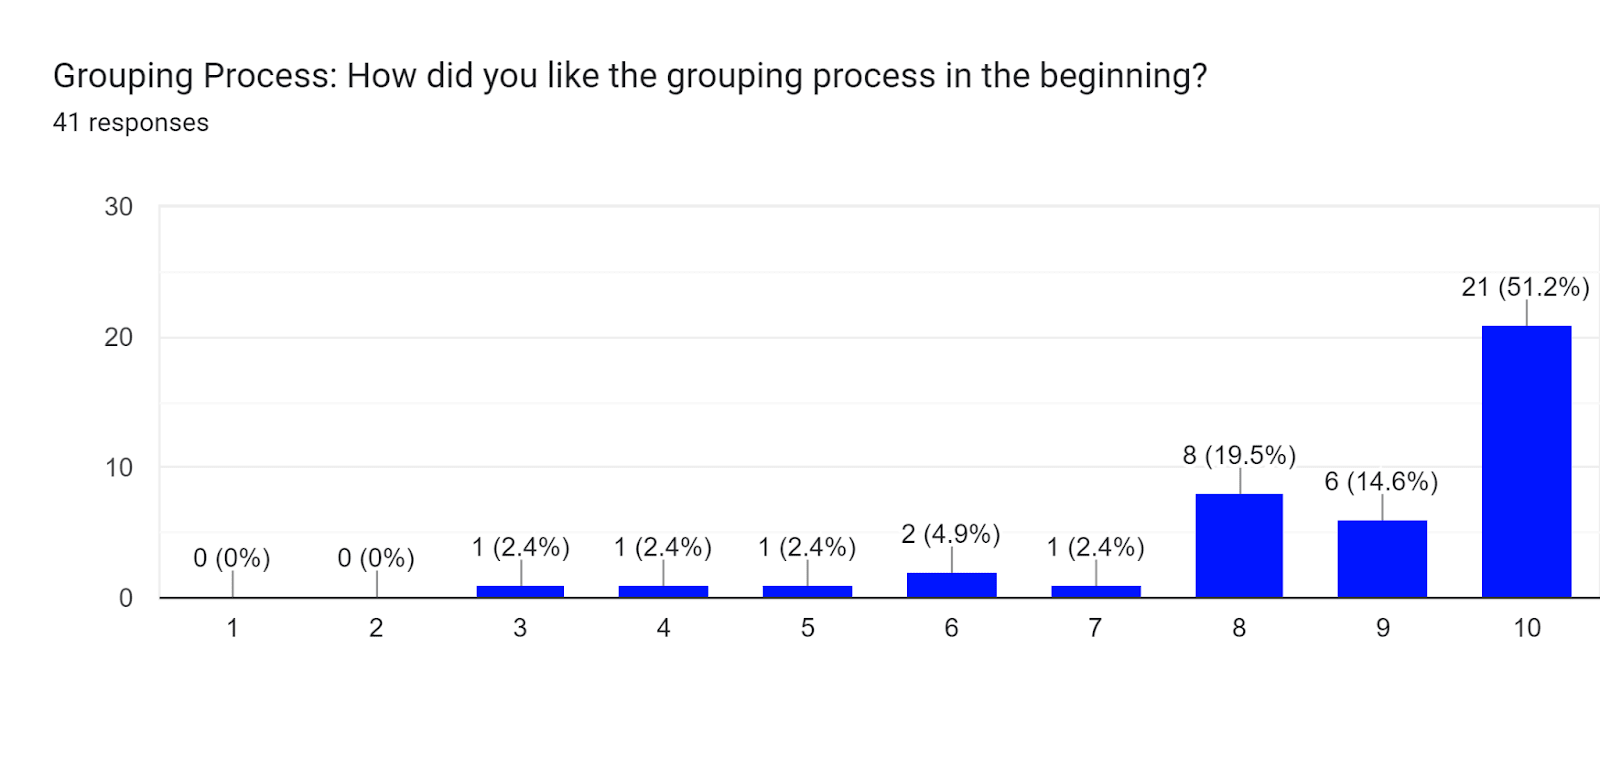 Forms response chart. Question title: Grouping Process: How did you like the grouping process in the beginning?. Number of responses: 41 responses.